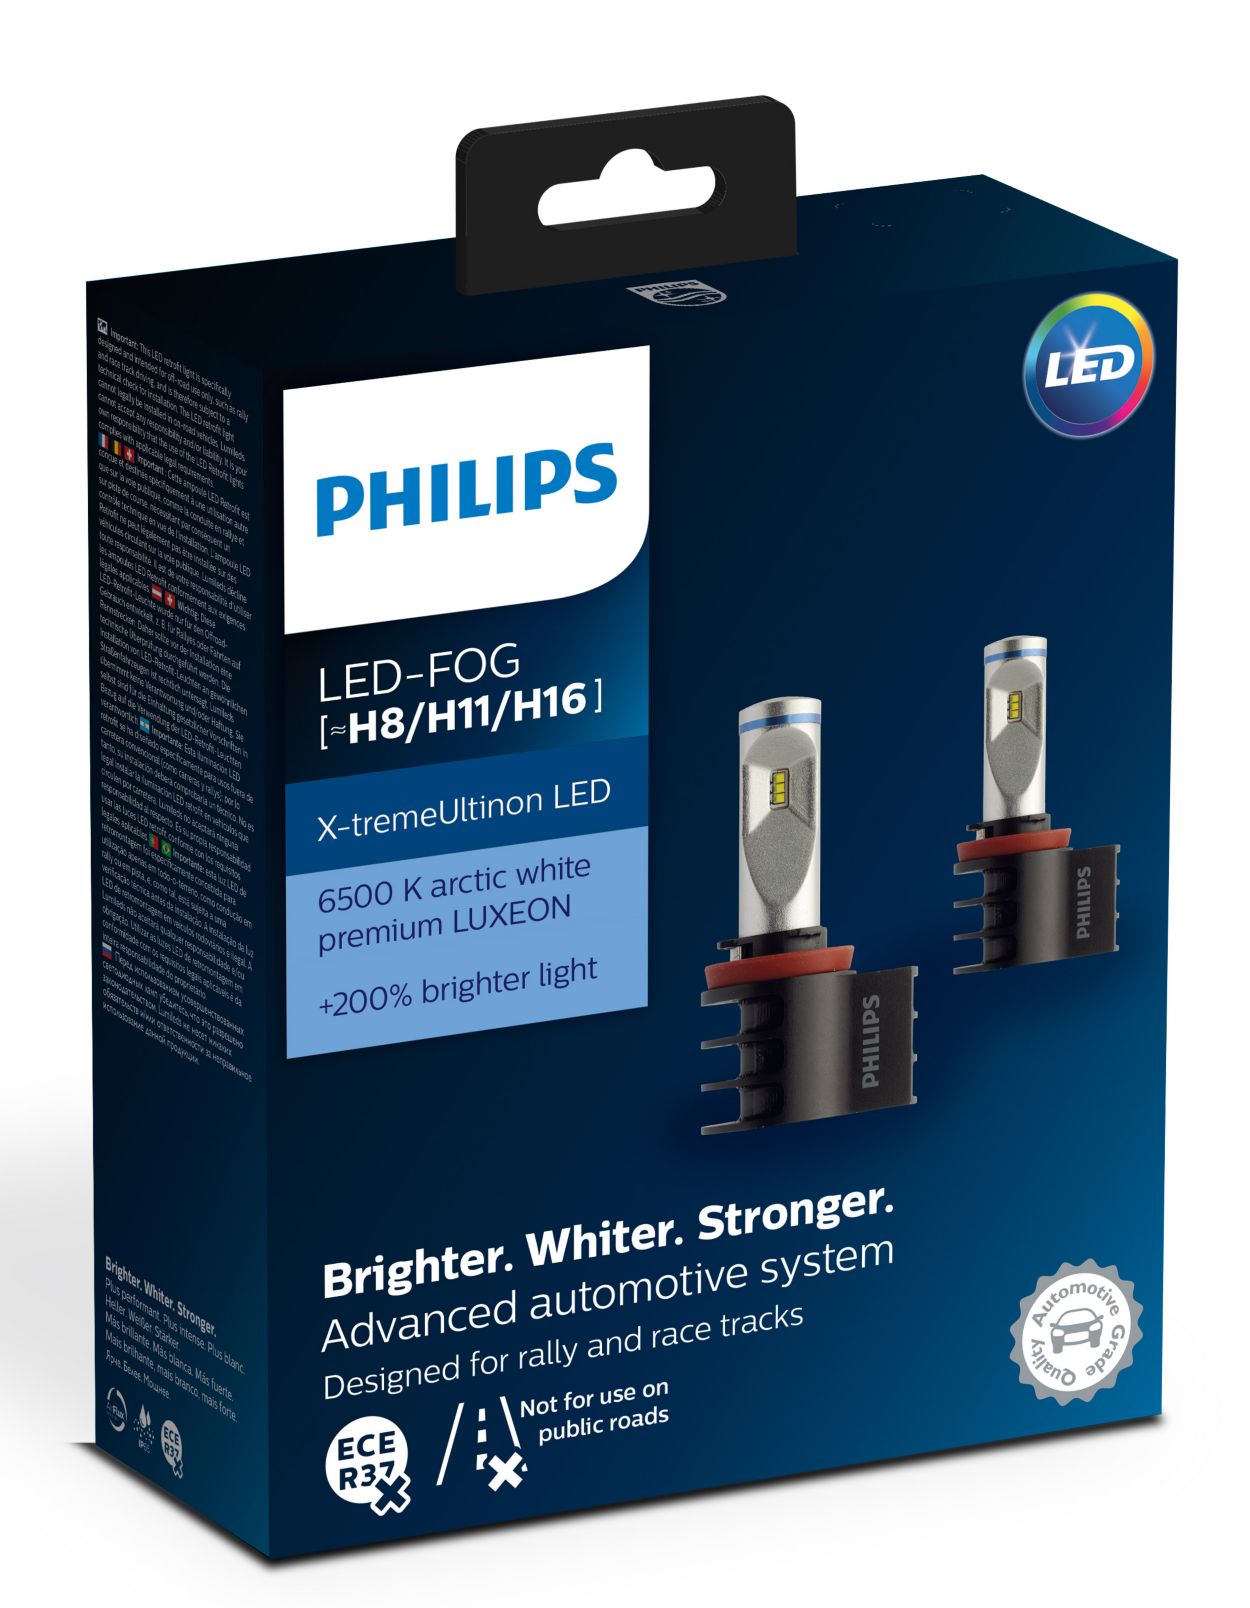 https://images.philips.com/is/image/philipsconsumer/6e192d72d49243bd838fafac00a0c640?$jpglarge$&wid=1250